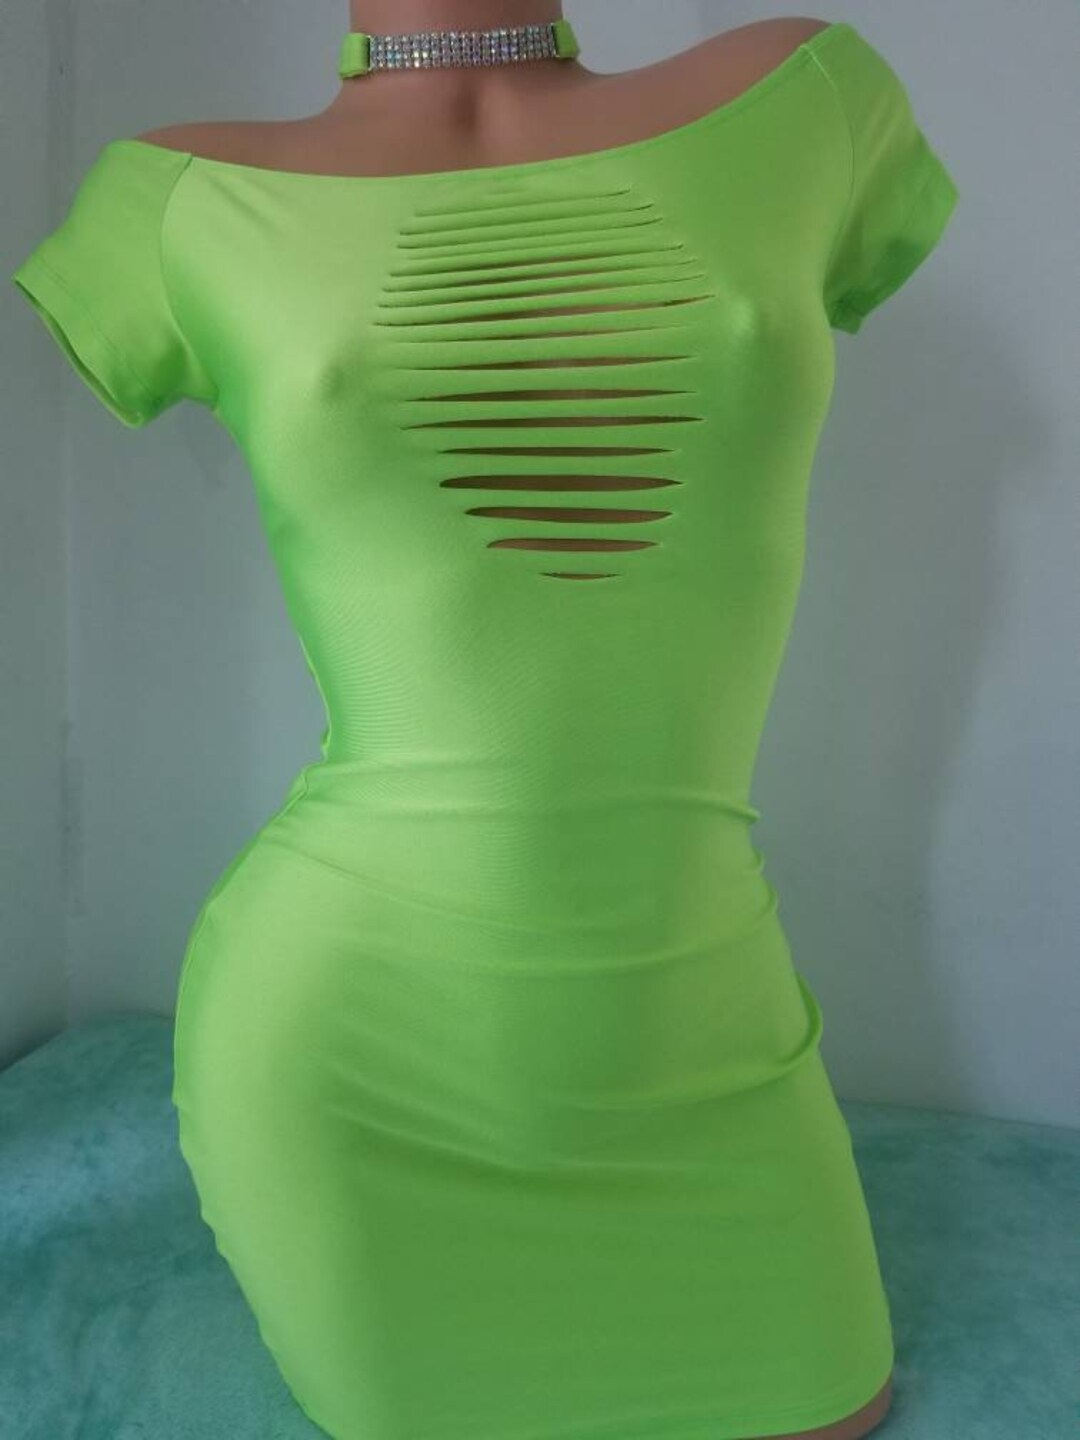 New Stripper Outfit/ Metallic lime green